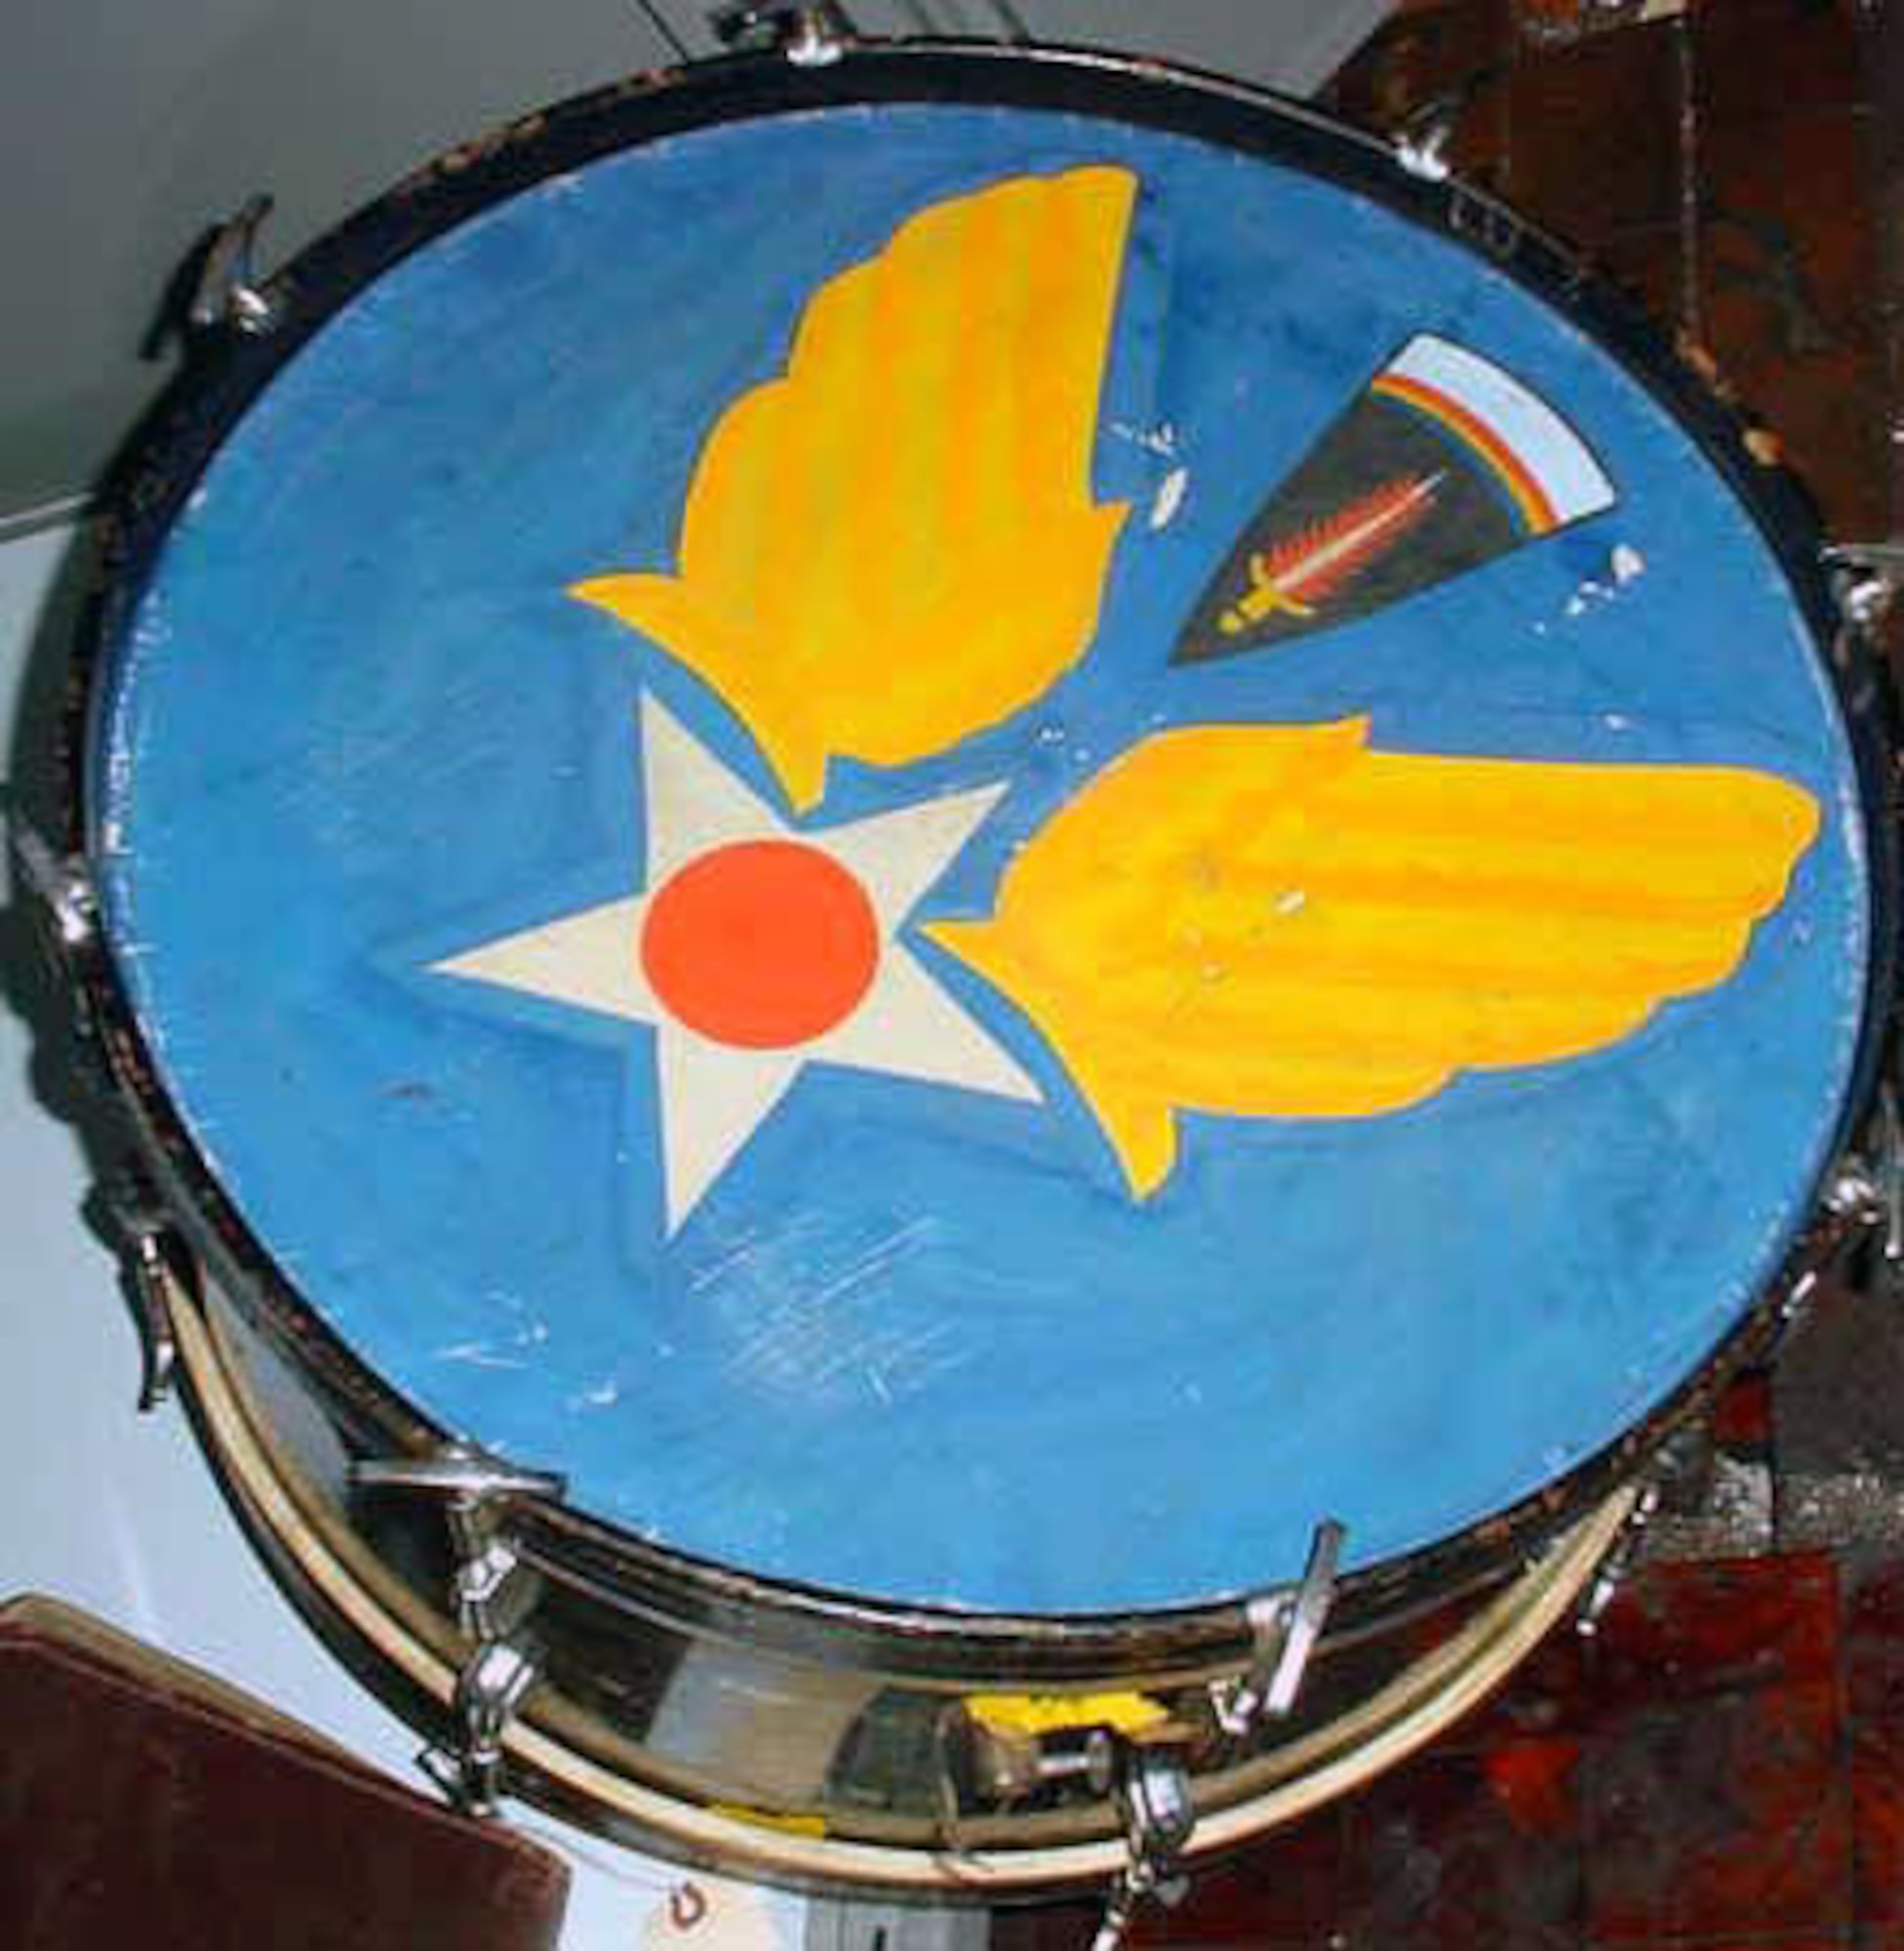 This drum, painted with the Army Air Force's insignia, belonged to the donor's husband, Sgt. Ray McKinley, who was a member of Maj. Glenn Miller's Army Air Force Band during World War II. (U.S. Air Force photo)